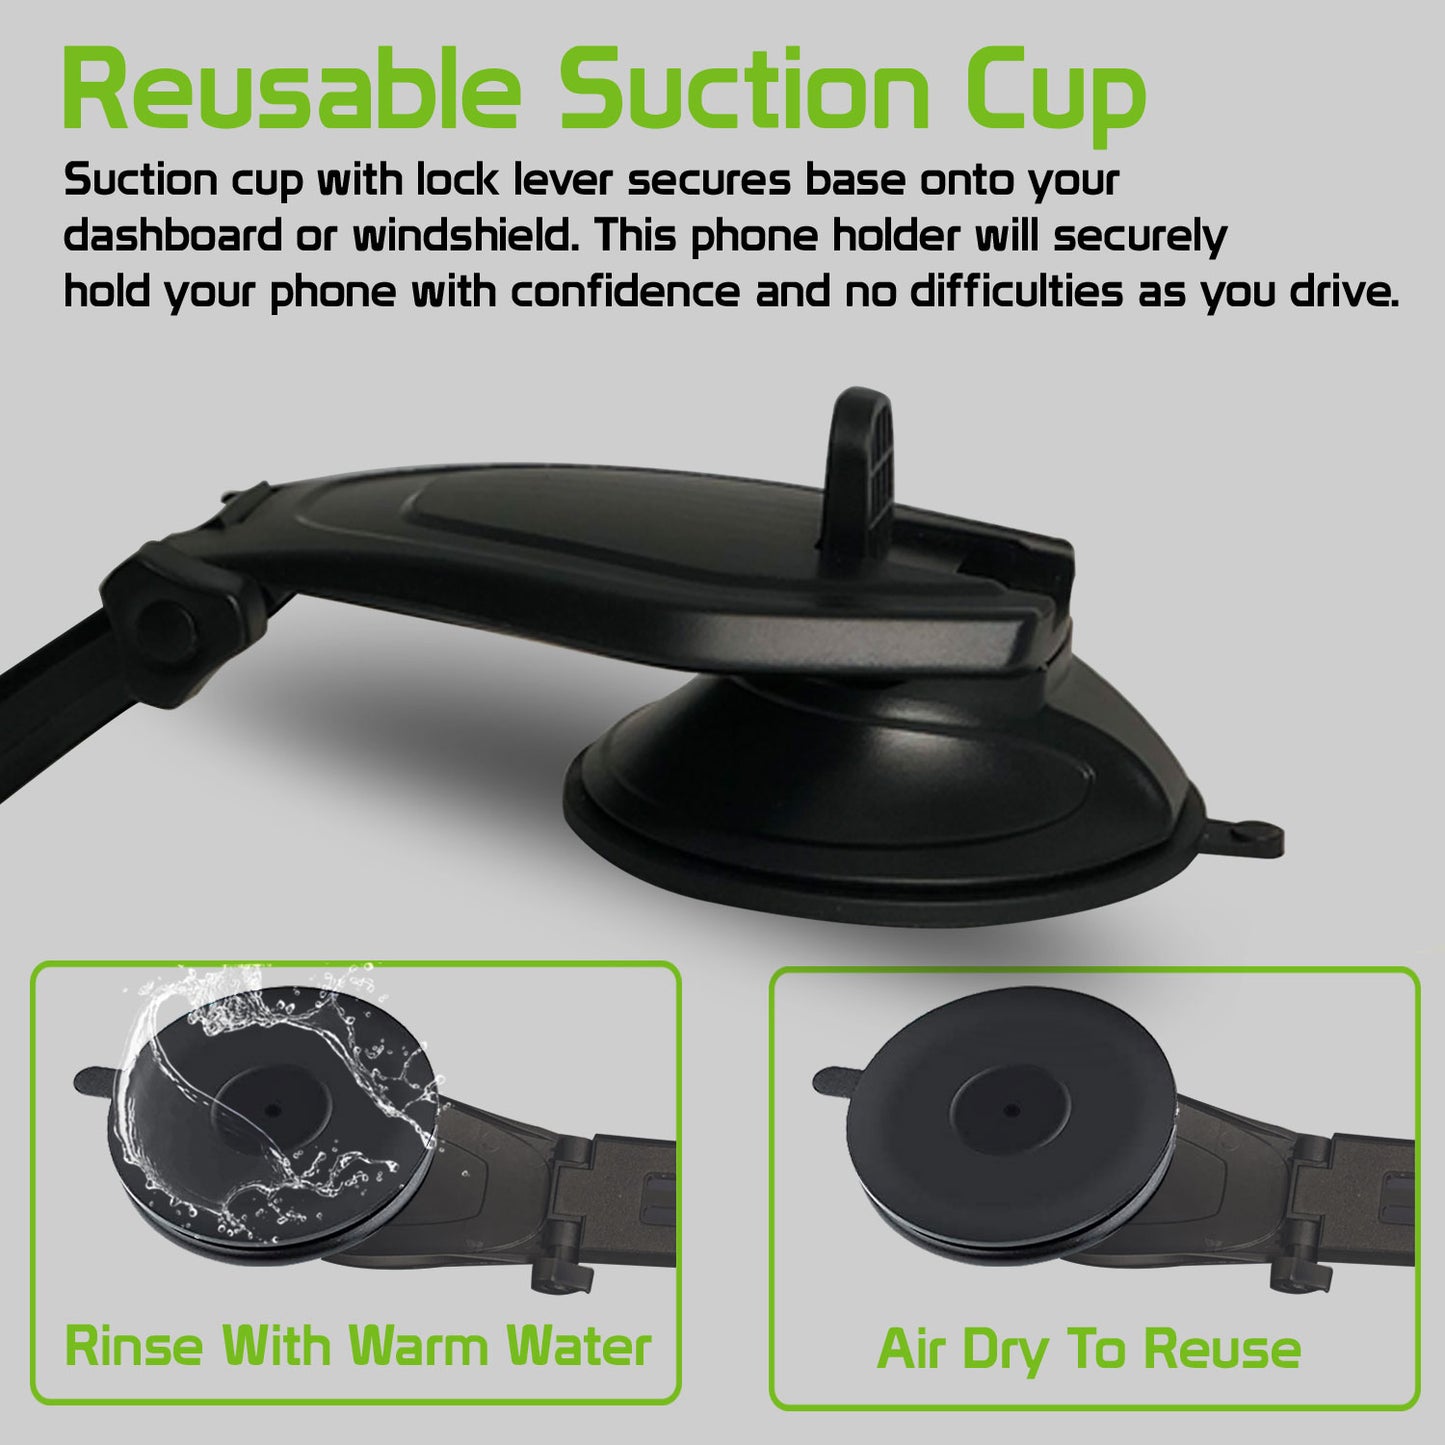 PHC82 - Universal Suction Cup Dashboard Phone Holder with 360 Degree Rotation, One Touch Arm release Button & Lock Lever for Smartphones